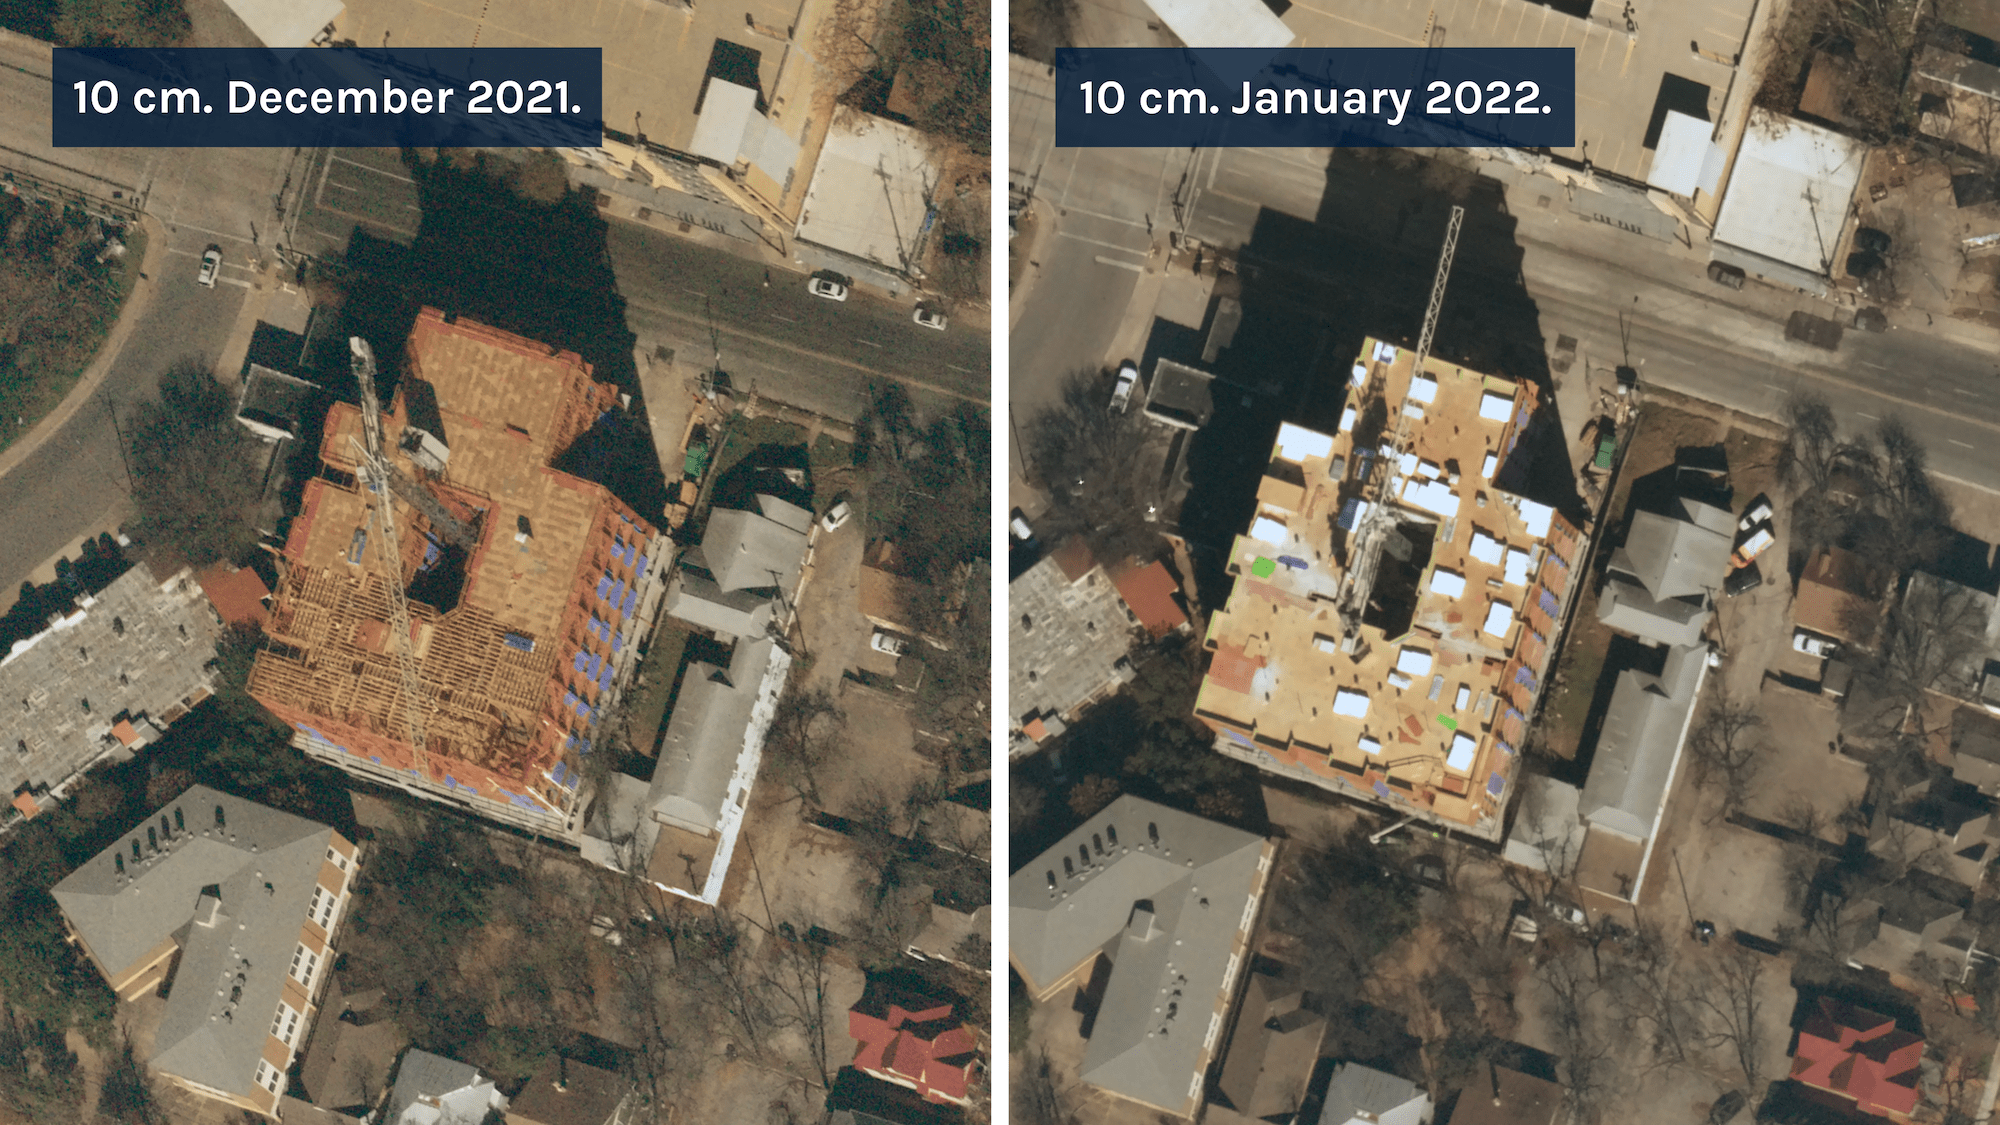 Construction progress of building from December 2021 to January 2022